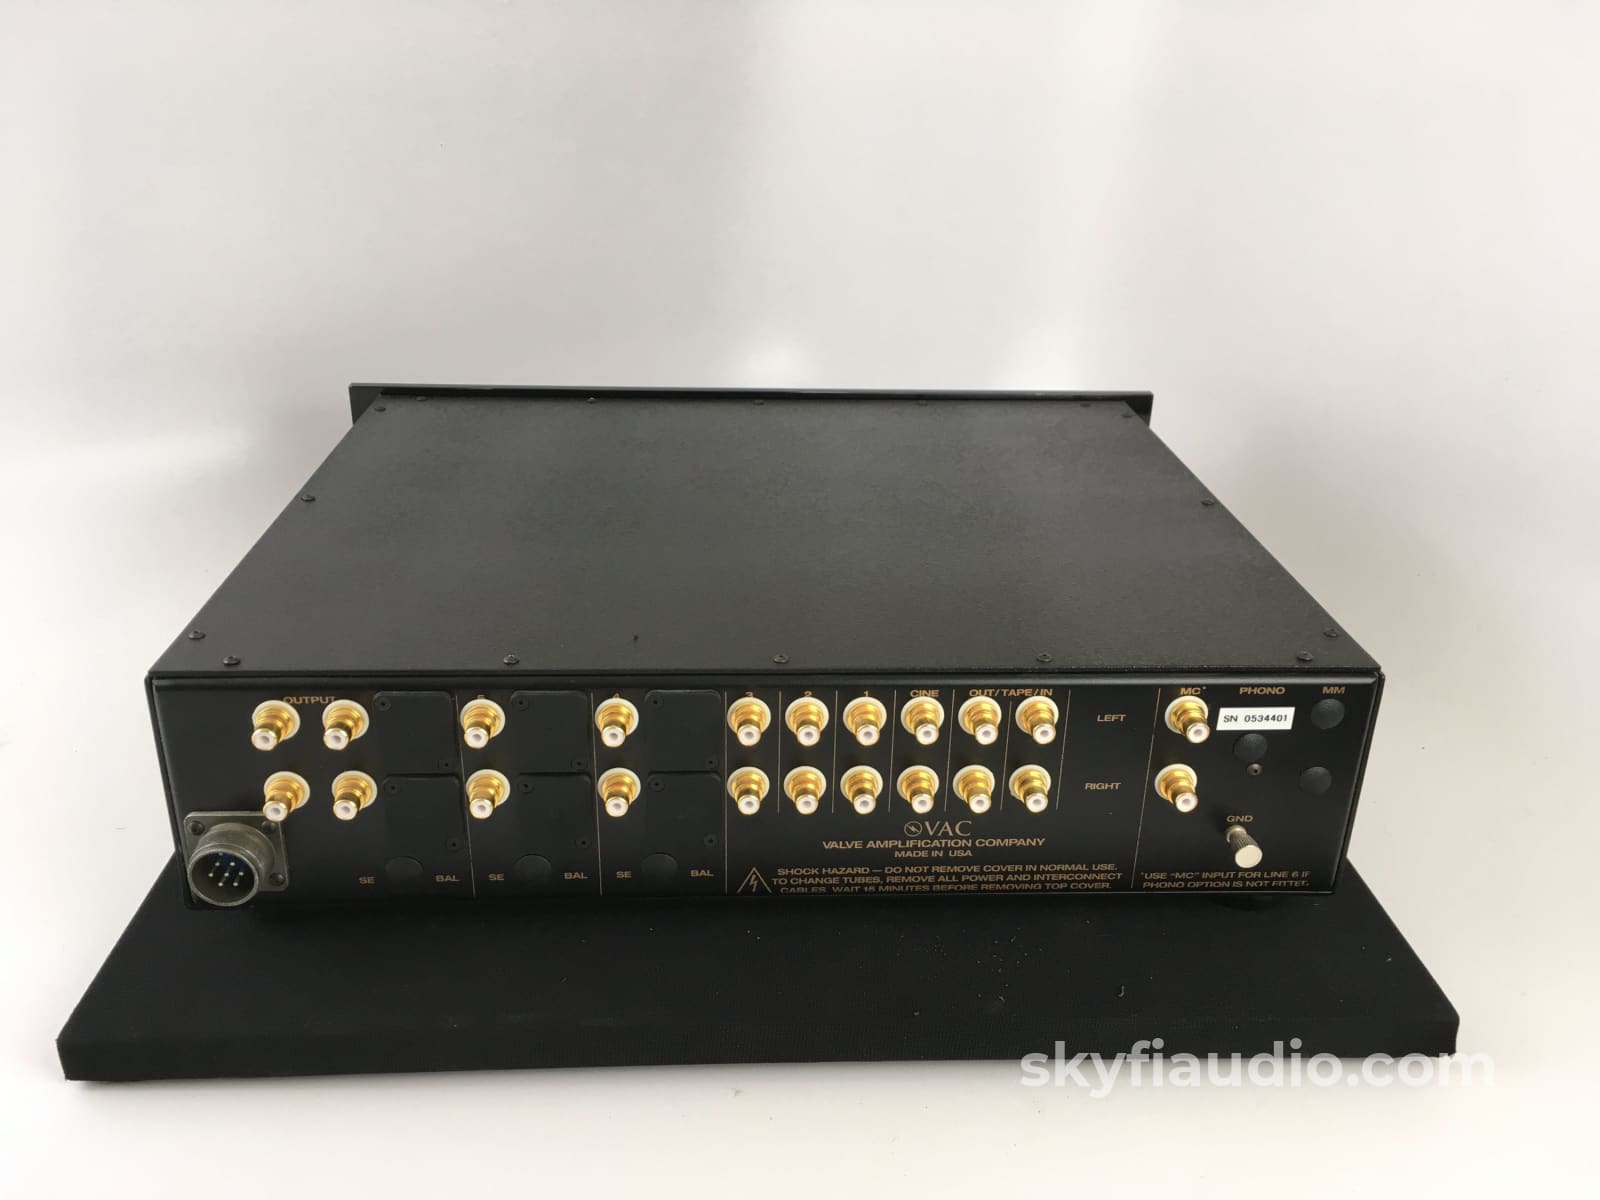 Vac (Valve Amplification Company) Standard Le Limited Edition Tube Preamp Preamplifier